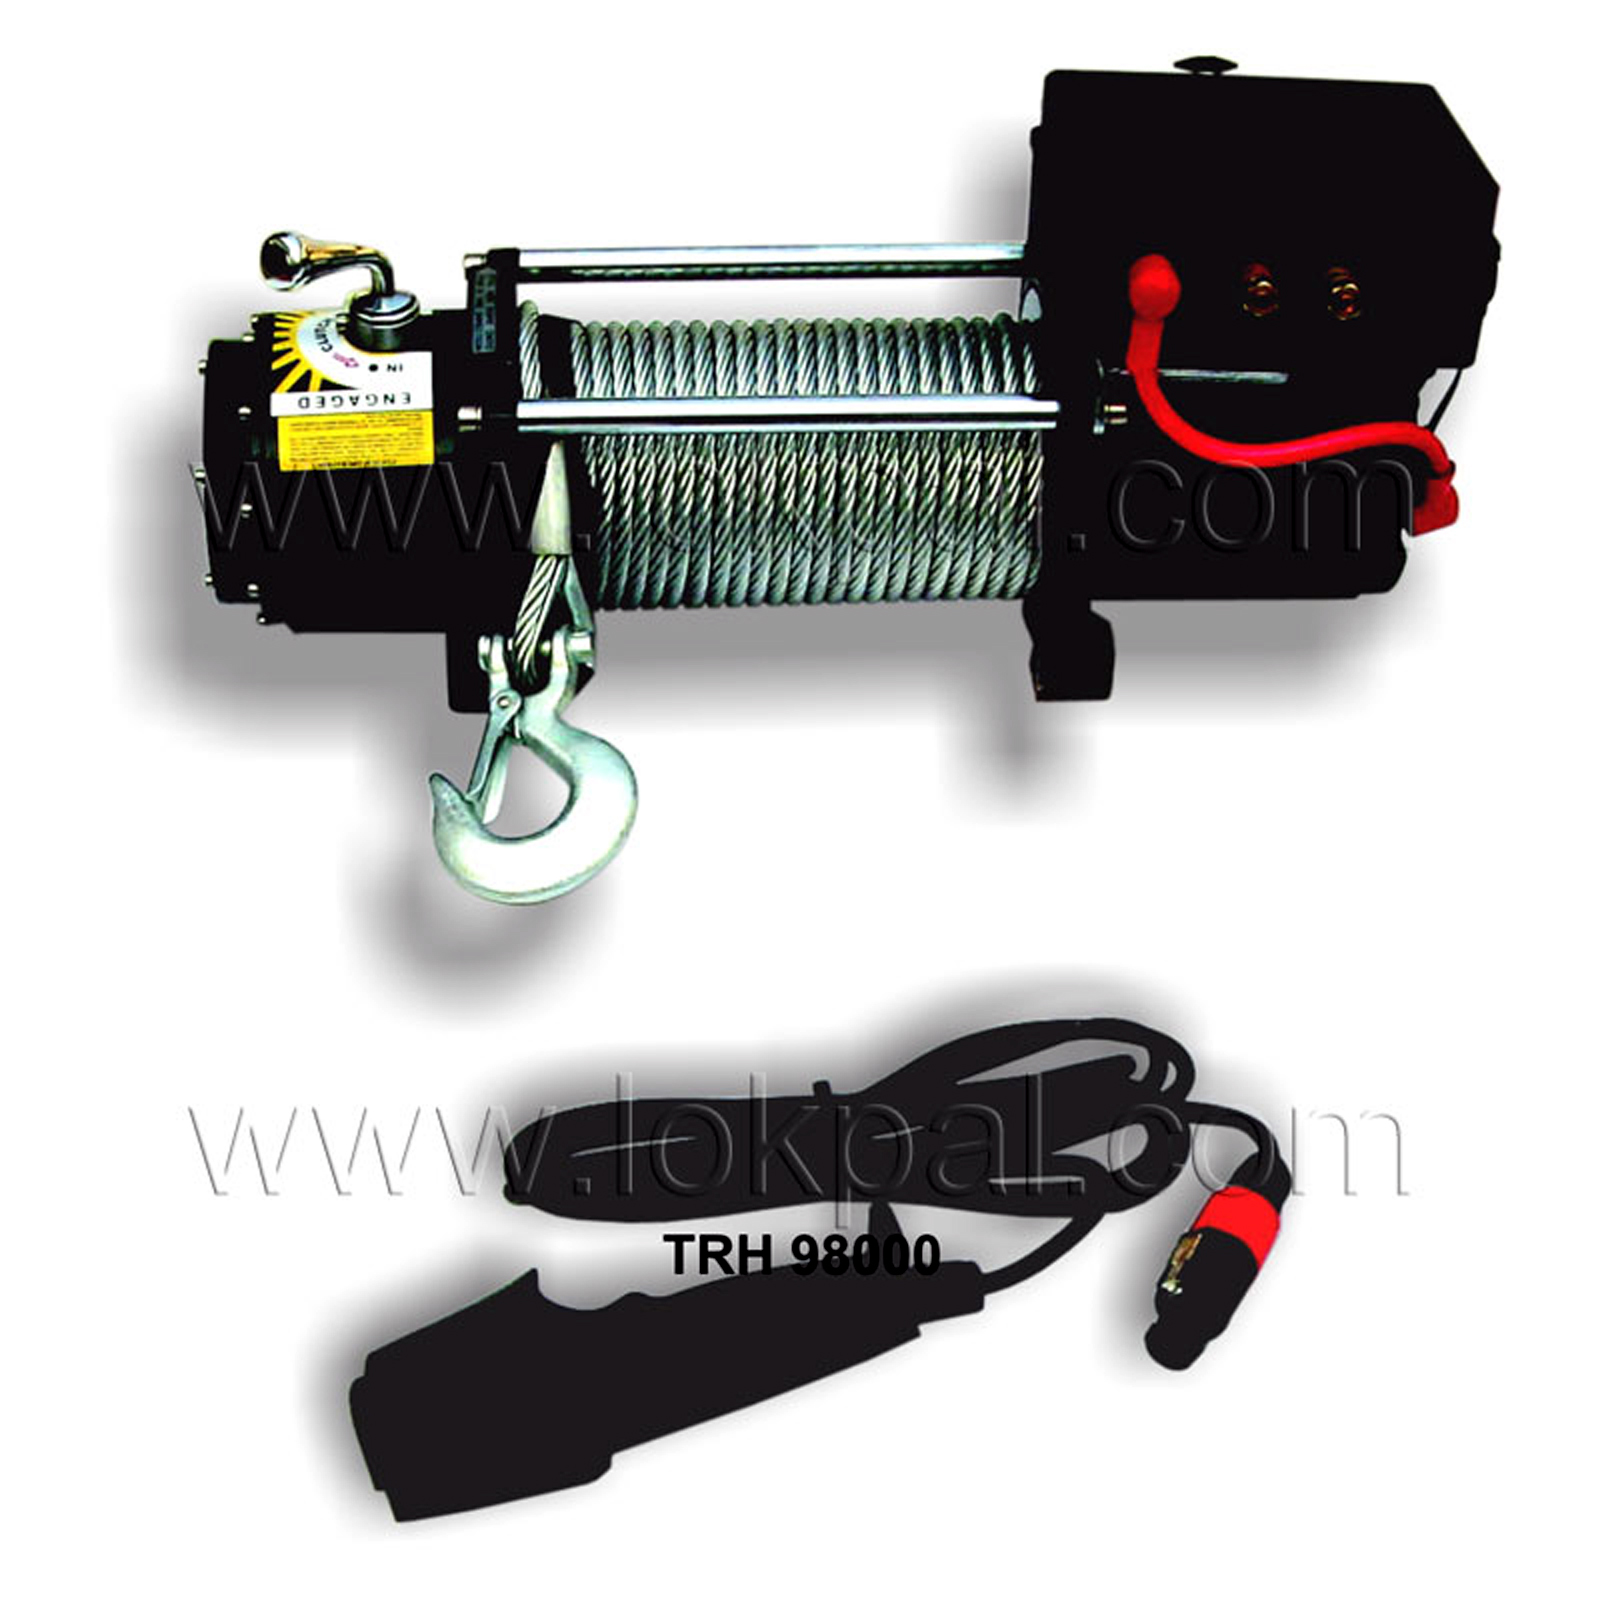 Electric Winch, Electric Winch Supplier, Distributor, Electric Winch Wholesaler, Lifting Hoist Manufacturer, Delhi NCR, Noida, India